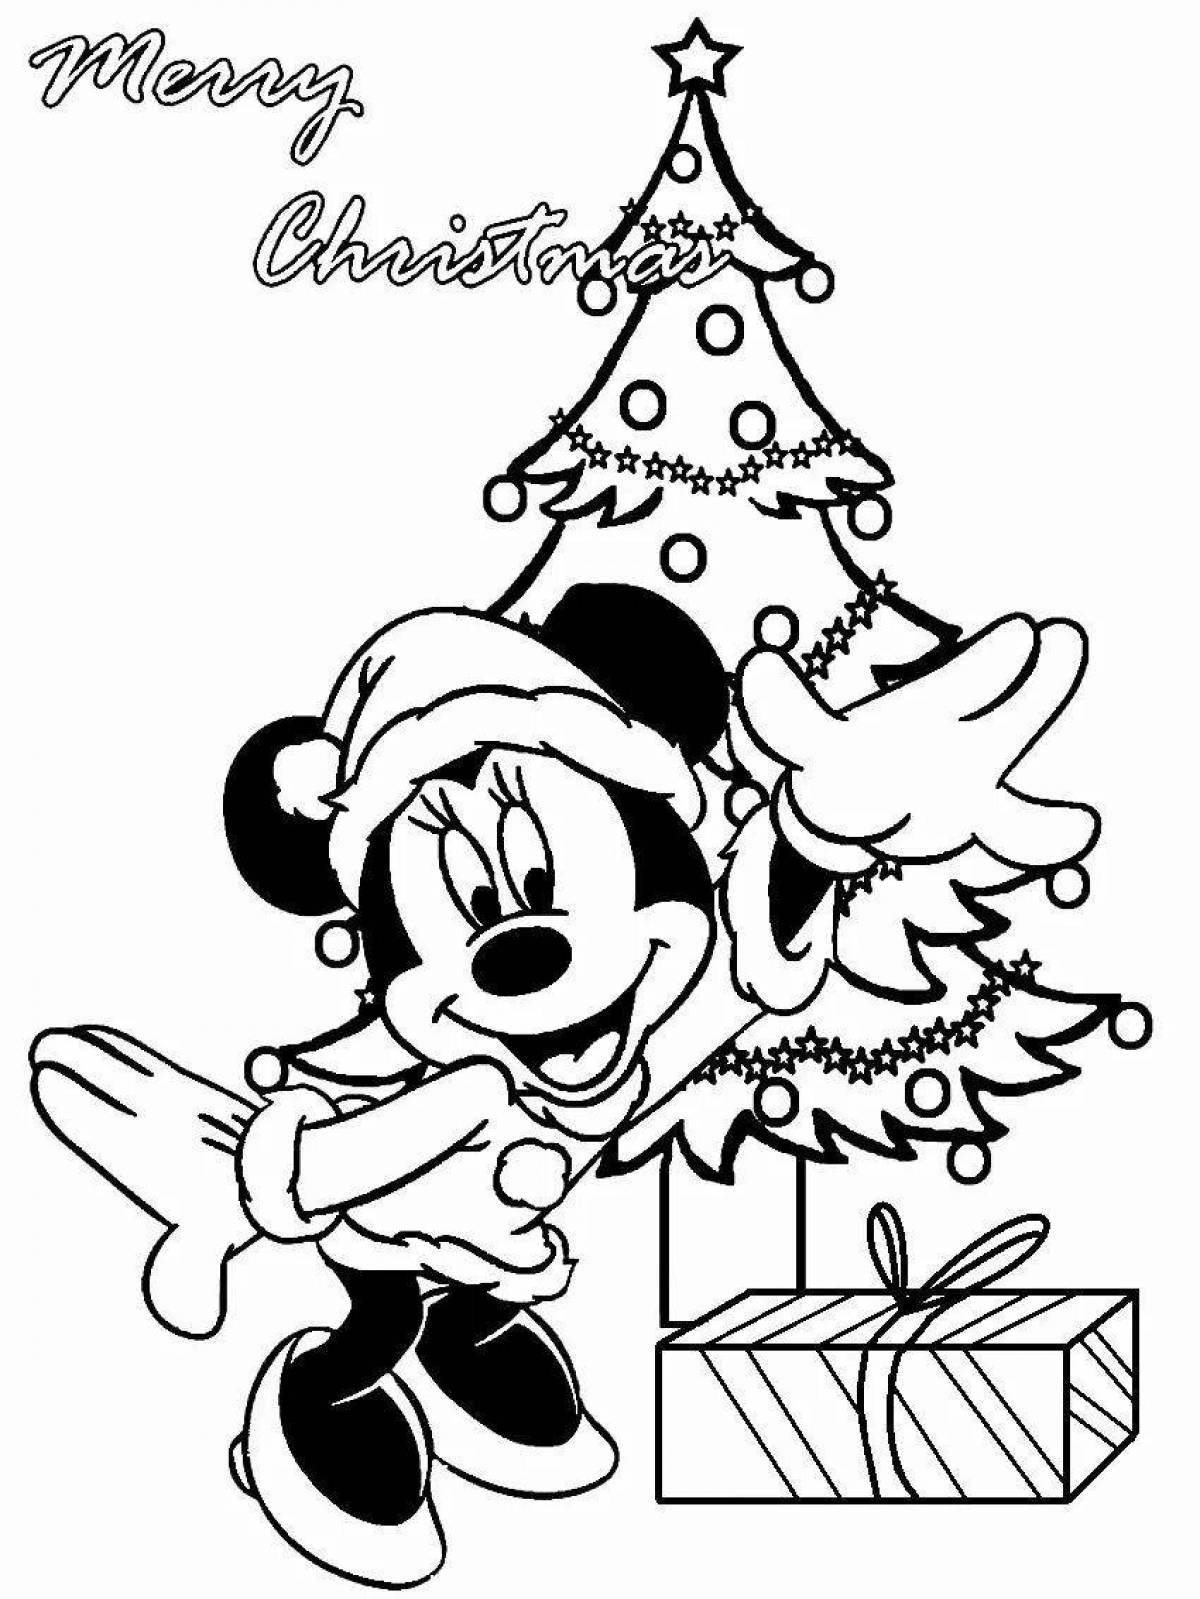 Great mickey mouse christmas coloring book